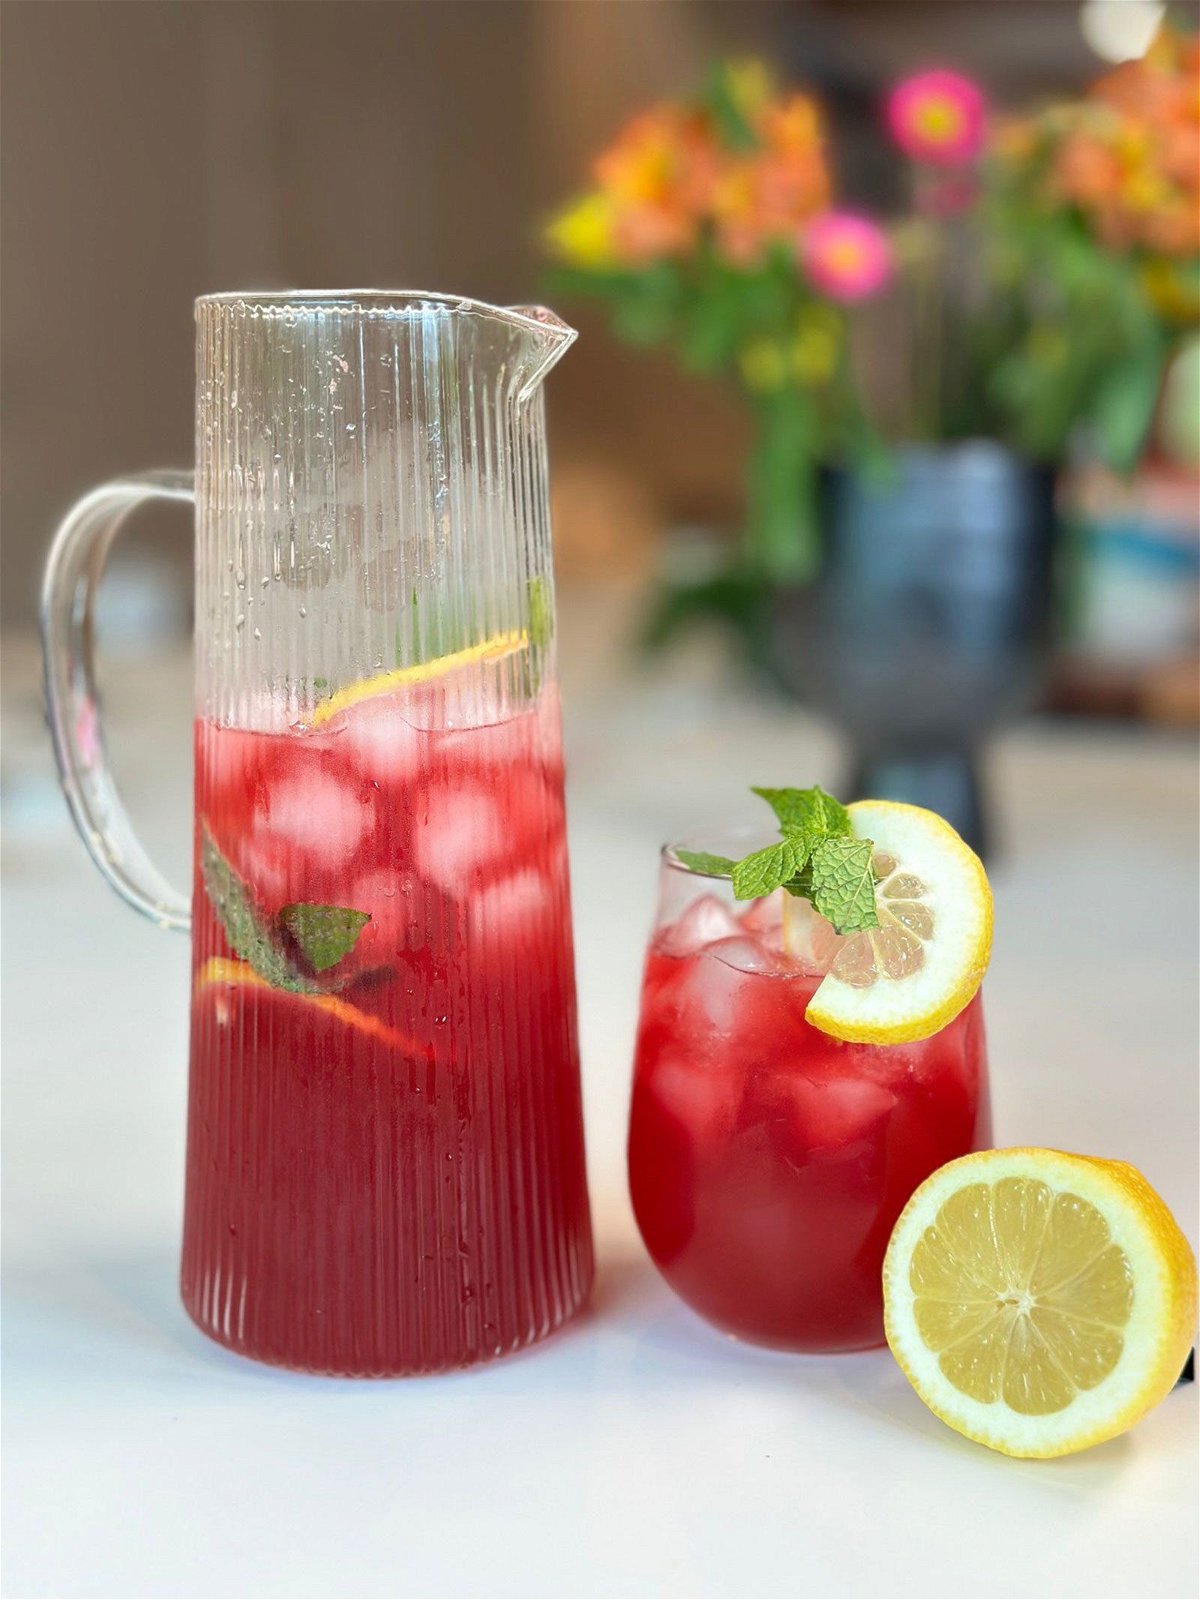 <i>Courtesy Chef Carla Hall via CNN Newsource</i><br/>Chef Carla Hall's drink Hibiscus Ginger Sweet Tea Soda is picturered here.